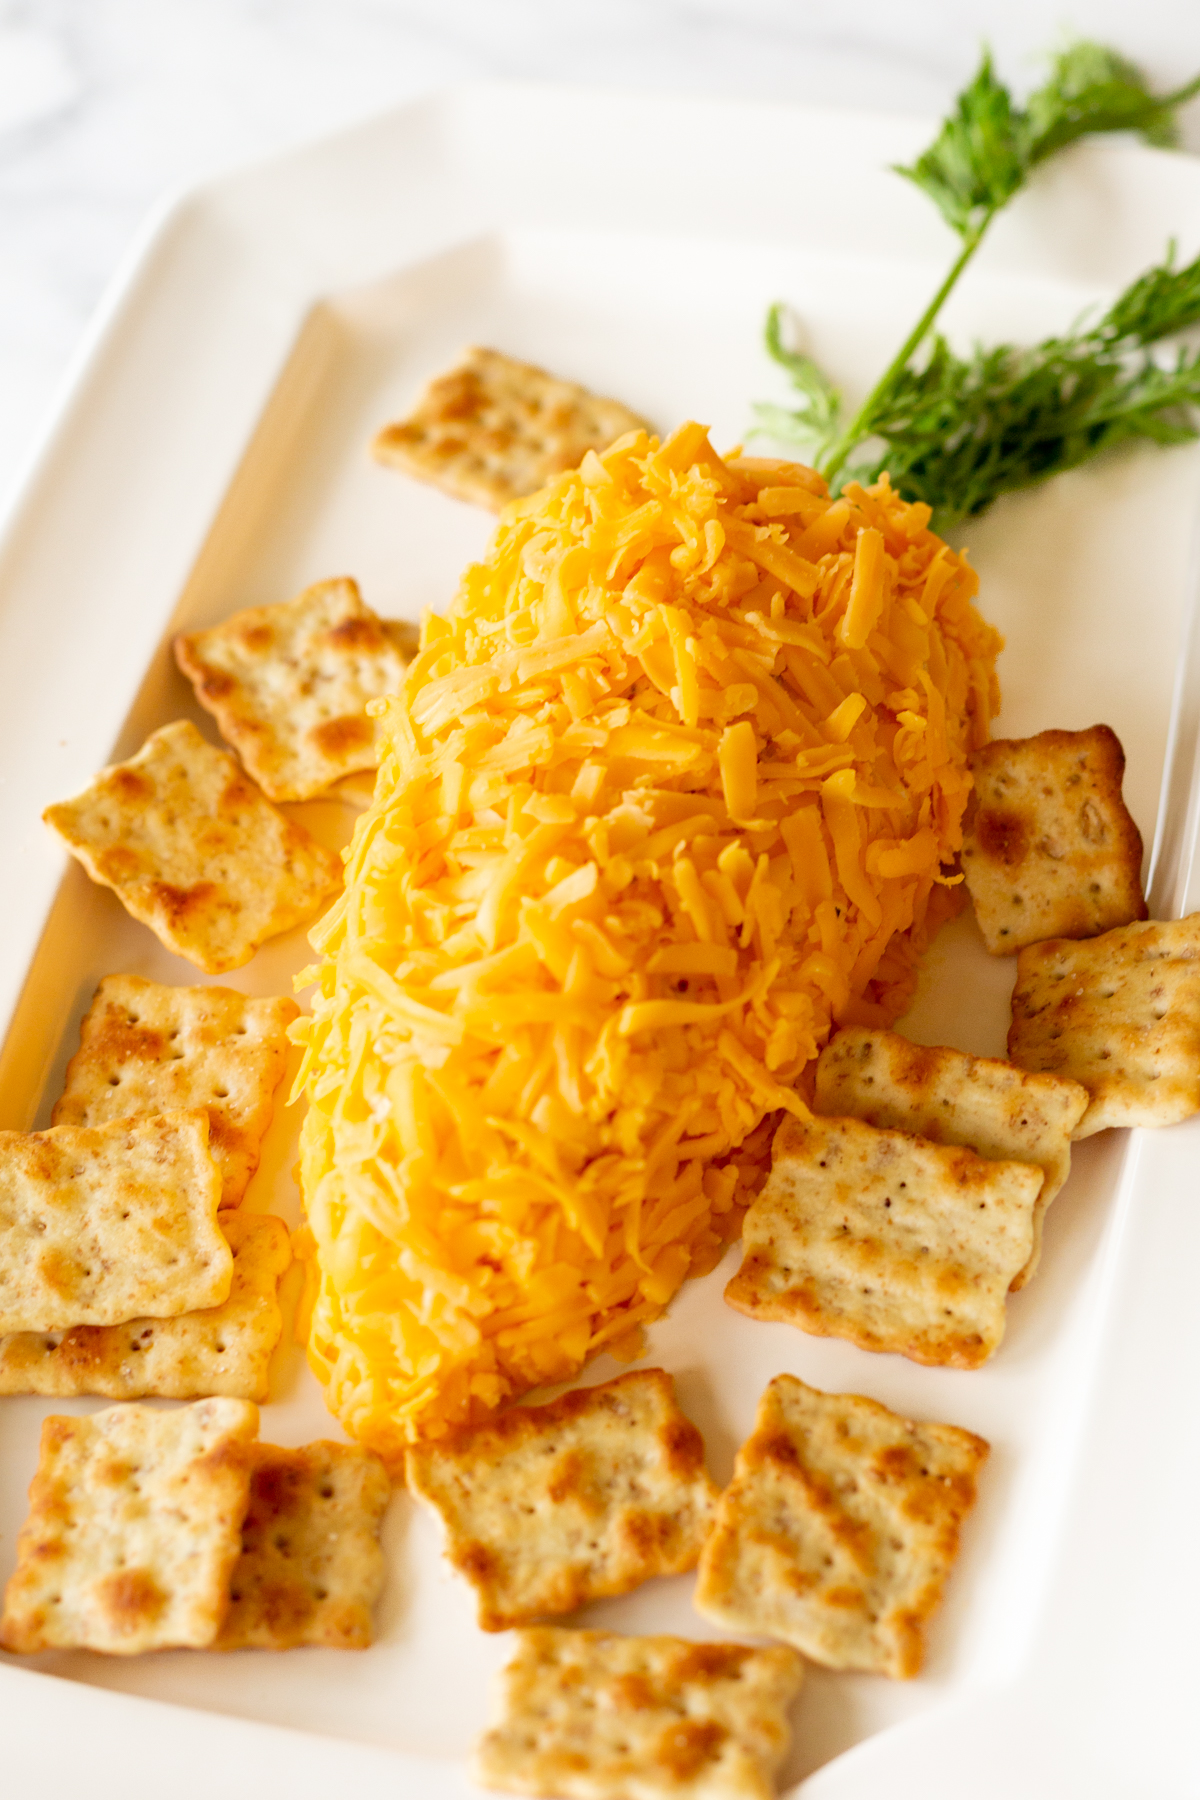 One of the best Easter recipes, a carrot shaped Easter cheese ball, surrounded by crackers on a white platter.